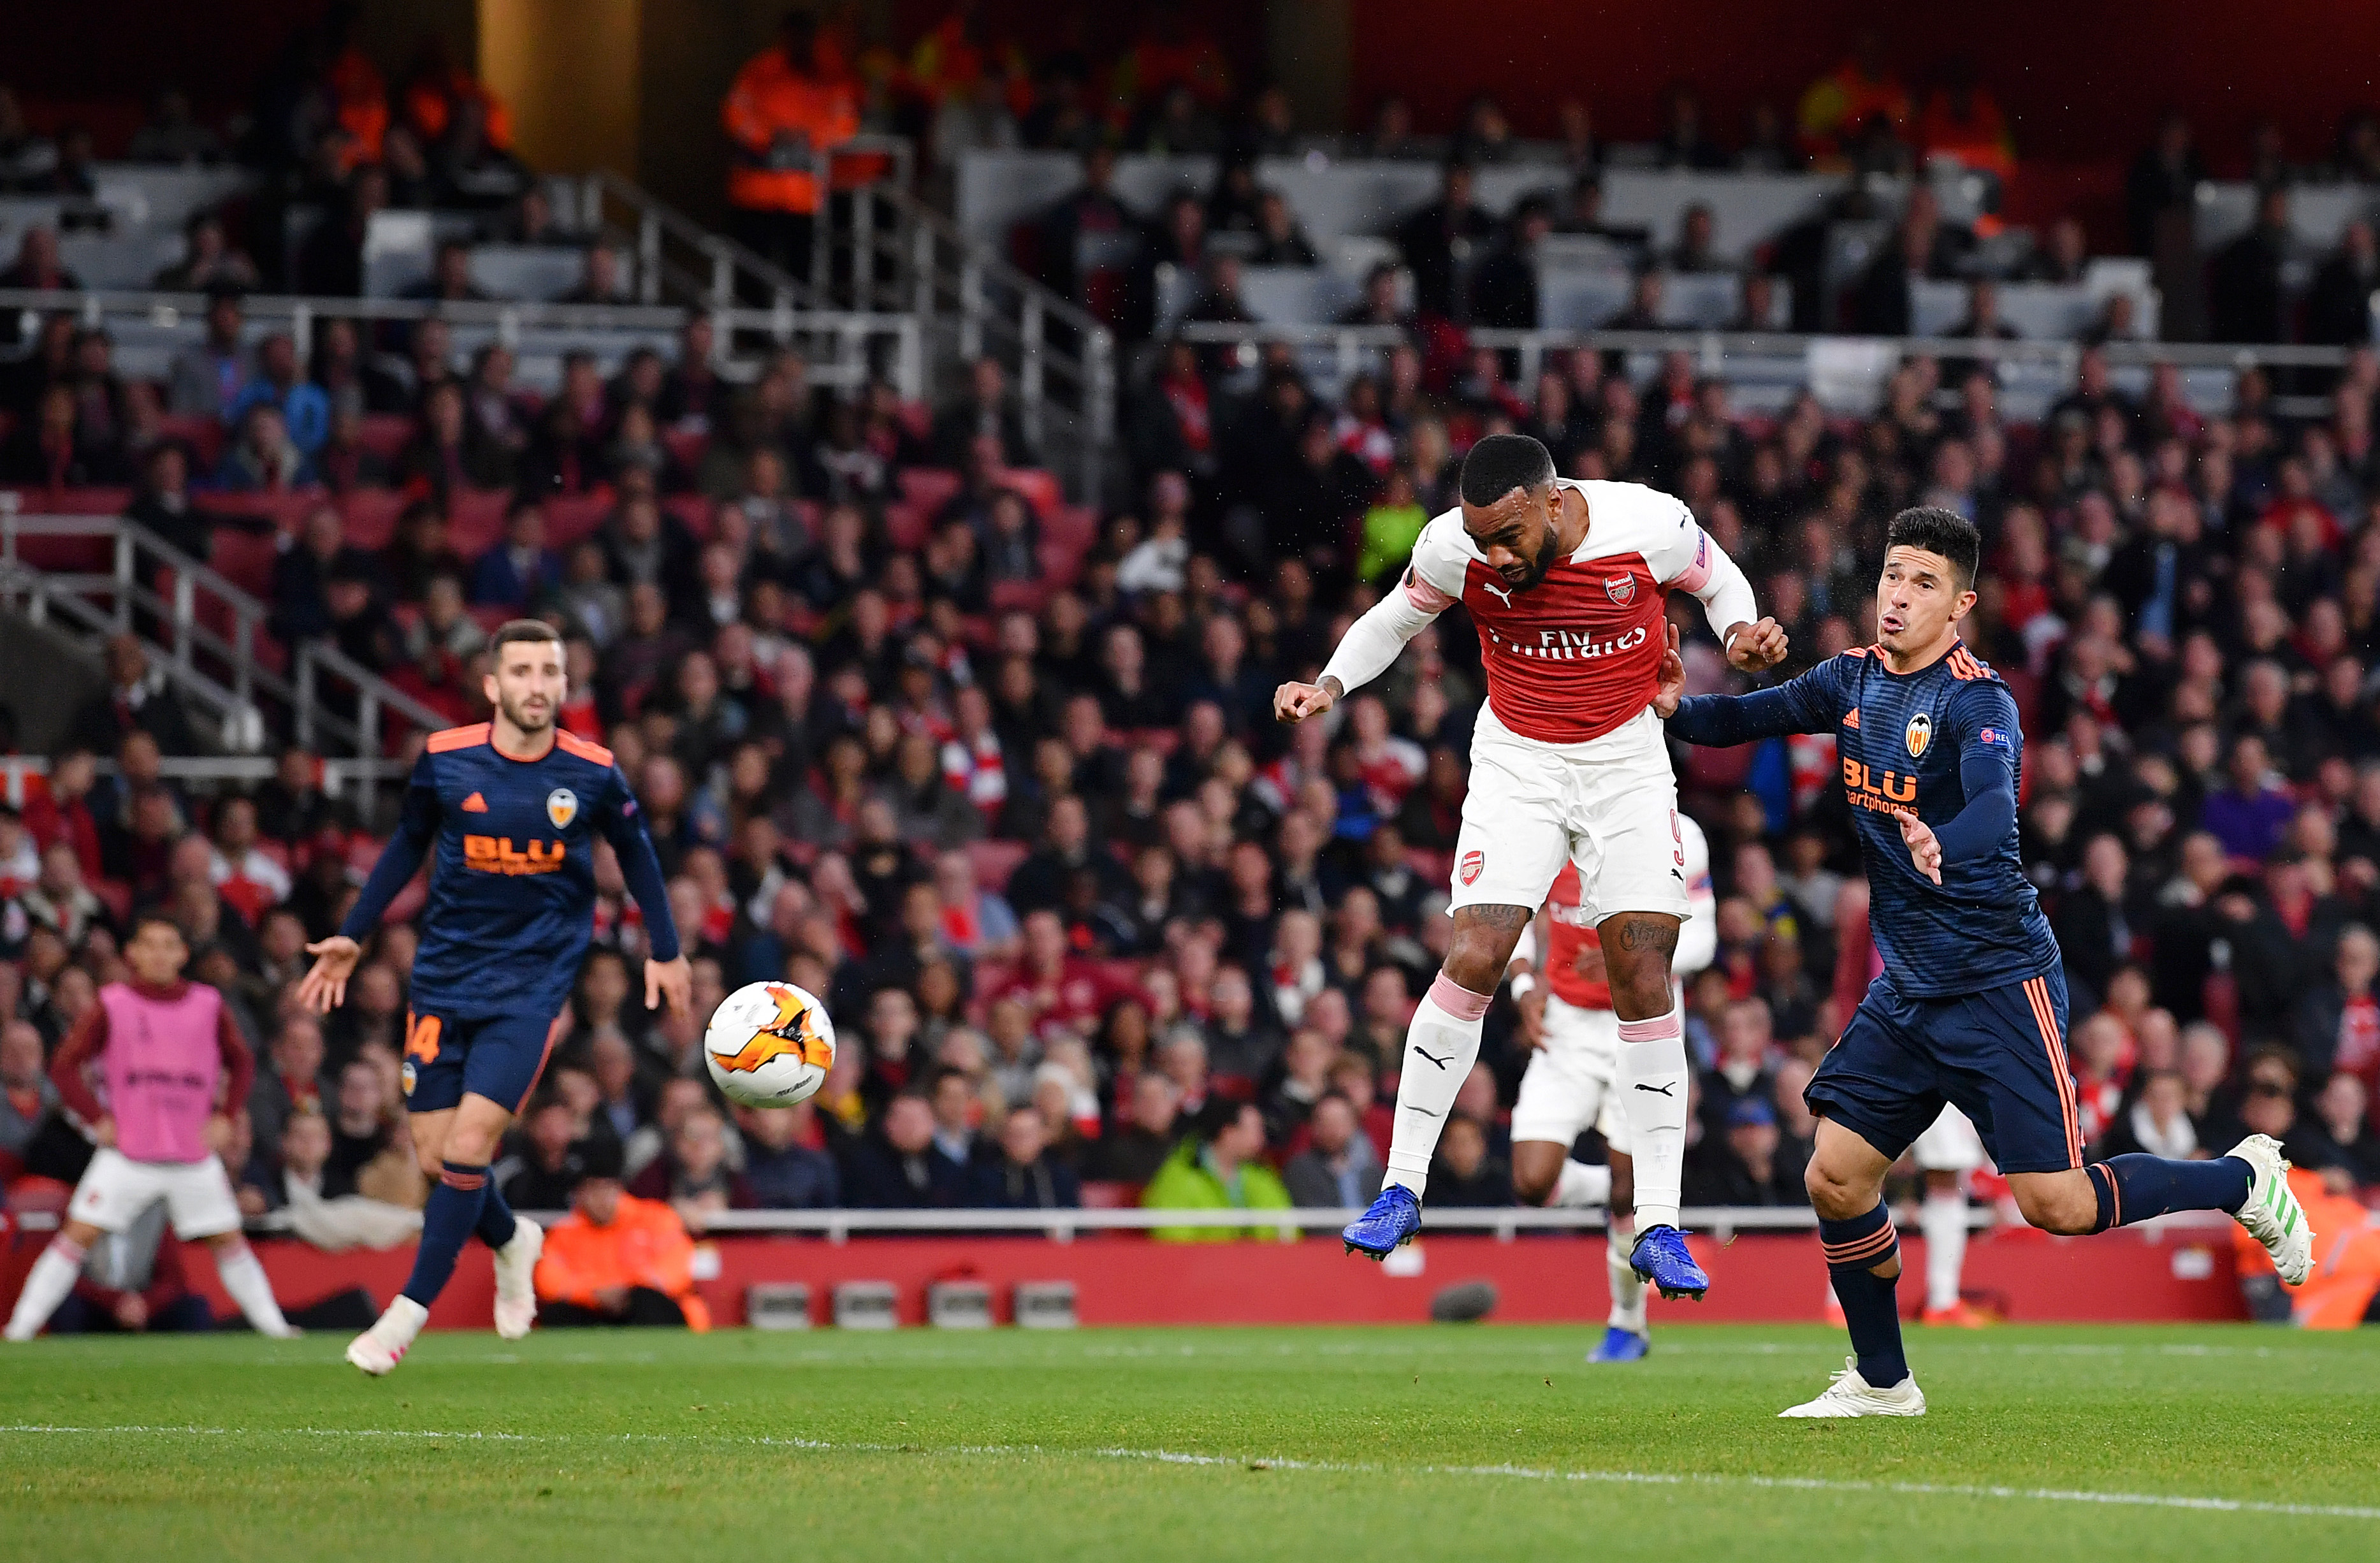 LONDON, ENGLAND - MAY 02:  Alexandre Lacazette of Arsenal scores his team's second goal during the UEFA Europa League Semi Final First Leg match between Arsenal and Valencia at Emirates Stadium on May 02, 2019 in London, England. (Photo by Justin Setterfield/Getty Images)